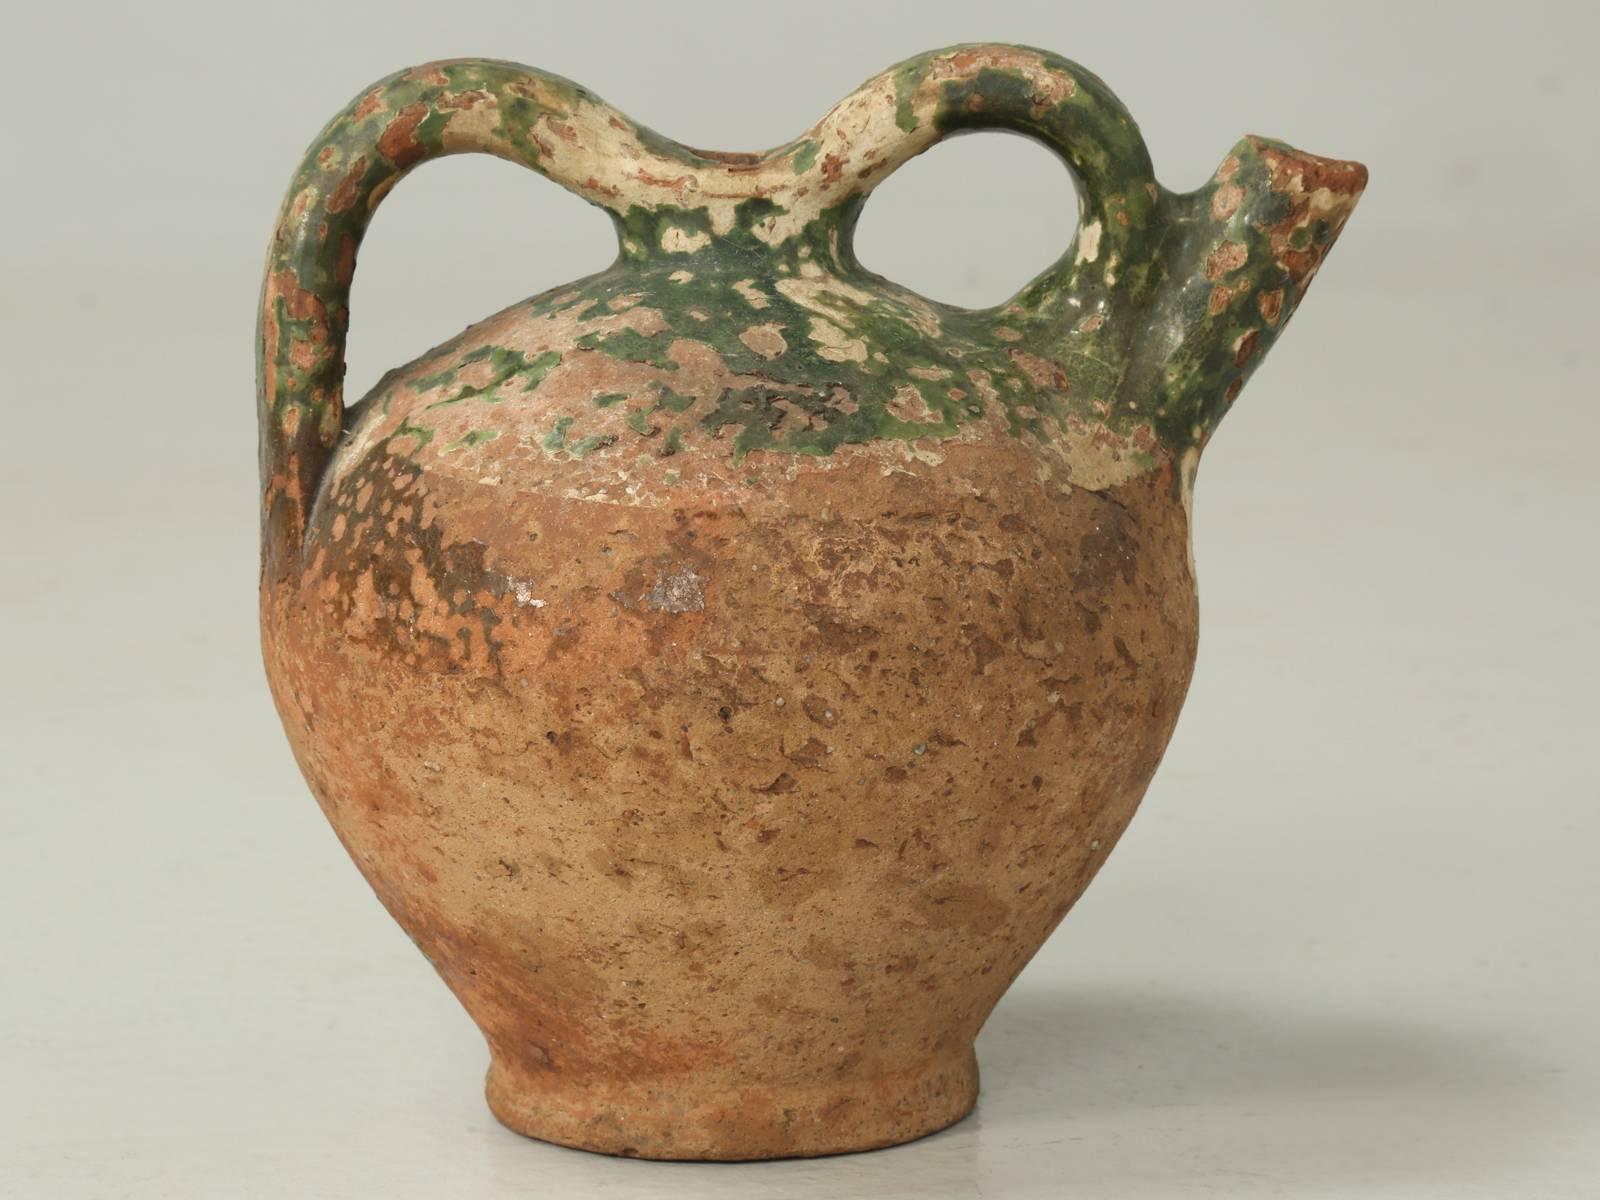 Some people will look at this piece of antique French pottery as a jug, with a very distressed green glaze, but I see it as a piece of sculpture. The design of the pottery’s handle is exquisite and almost give it a bit of a modern flare. Great